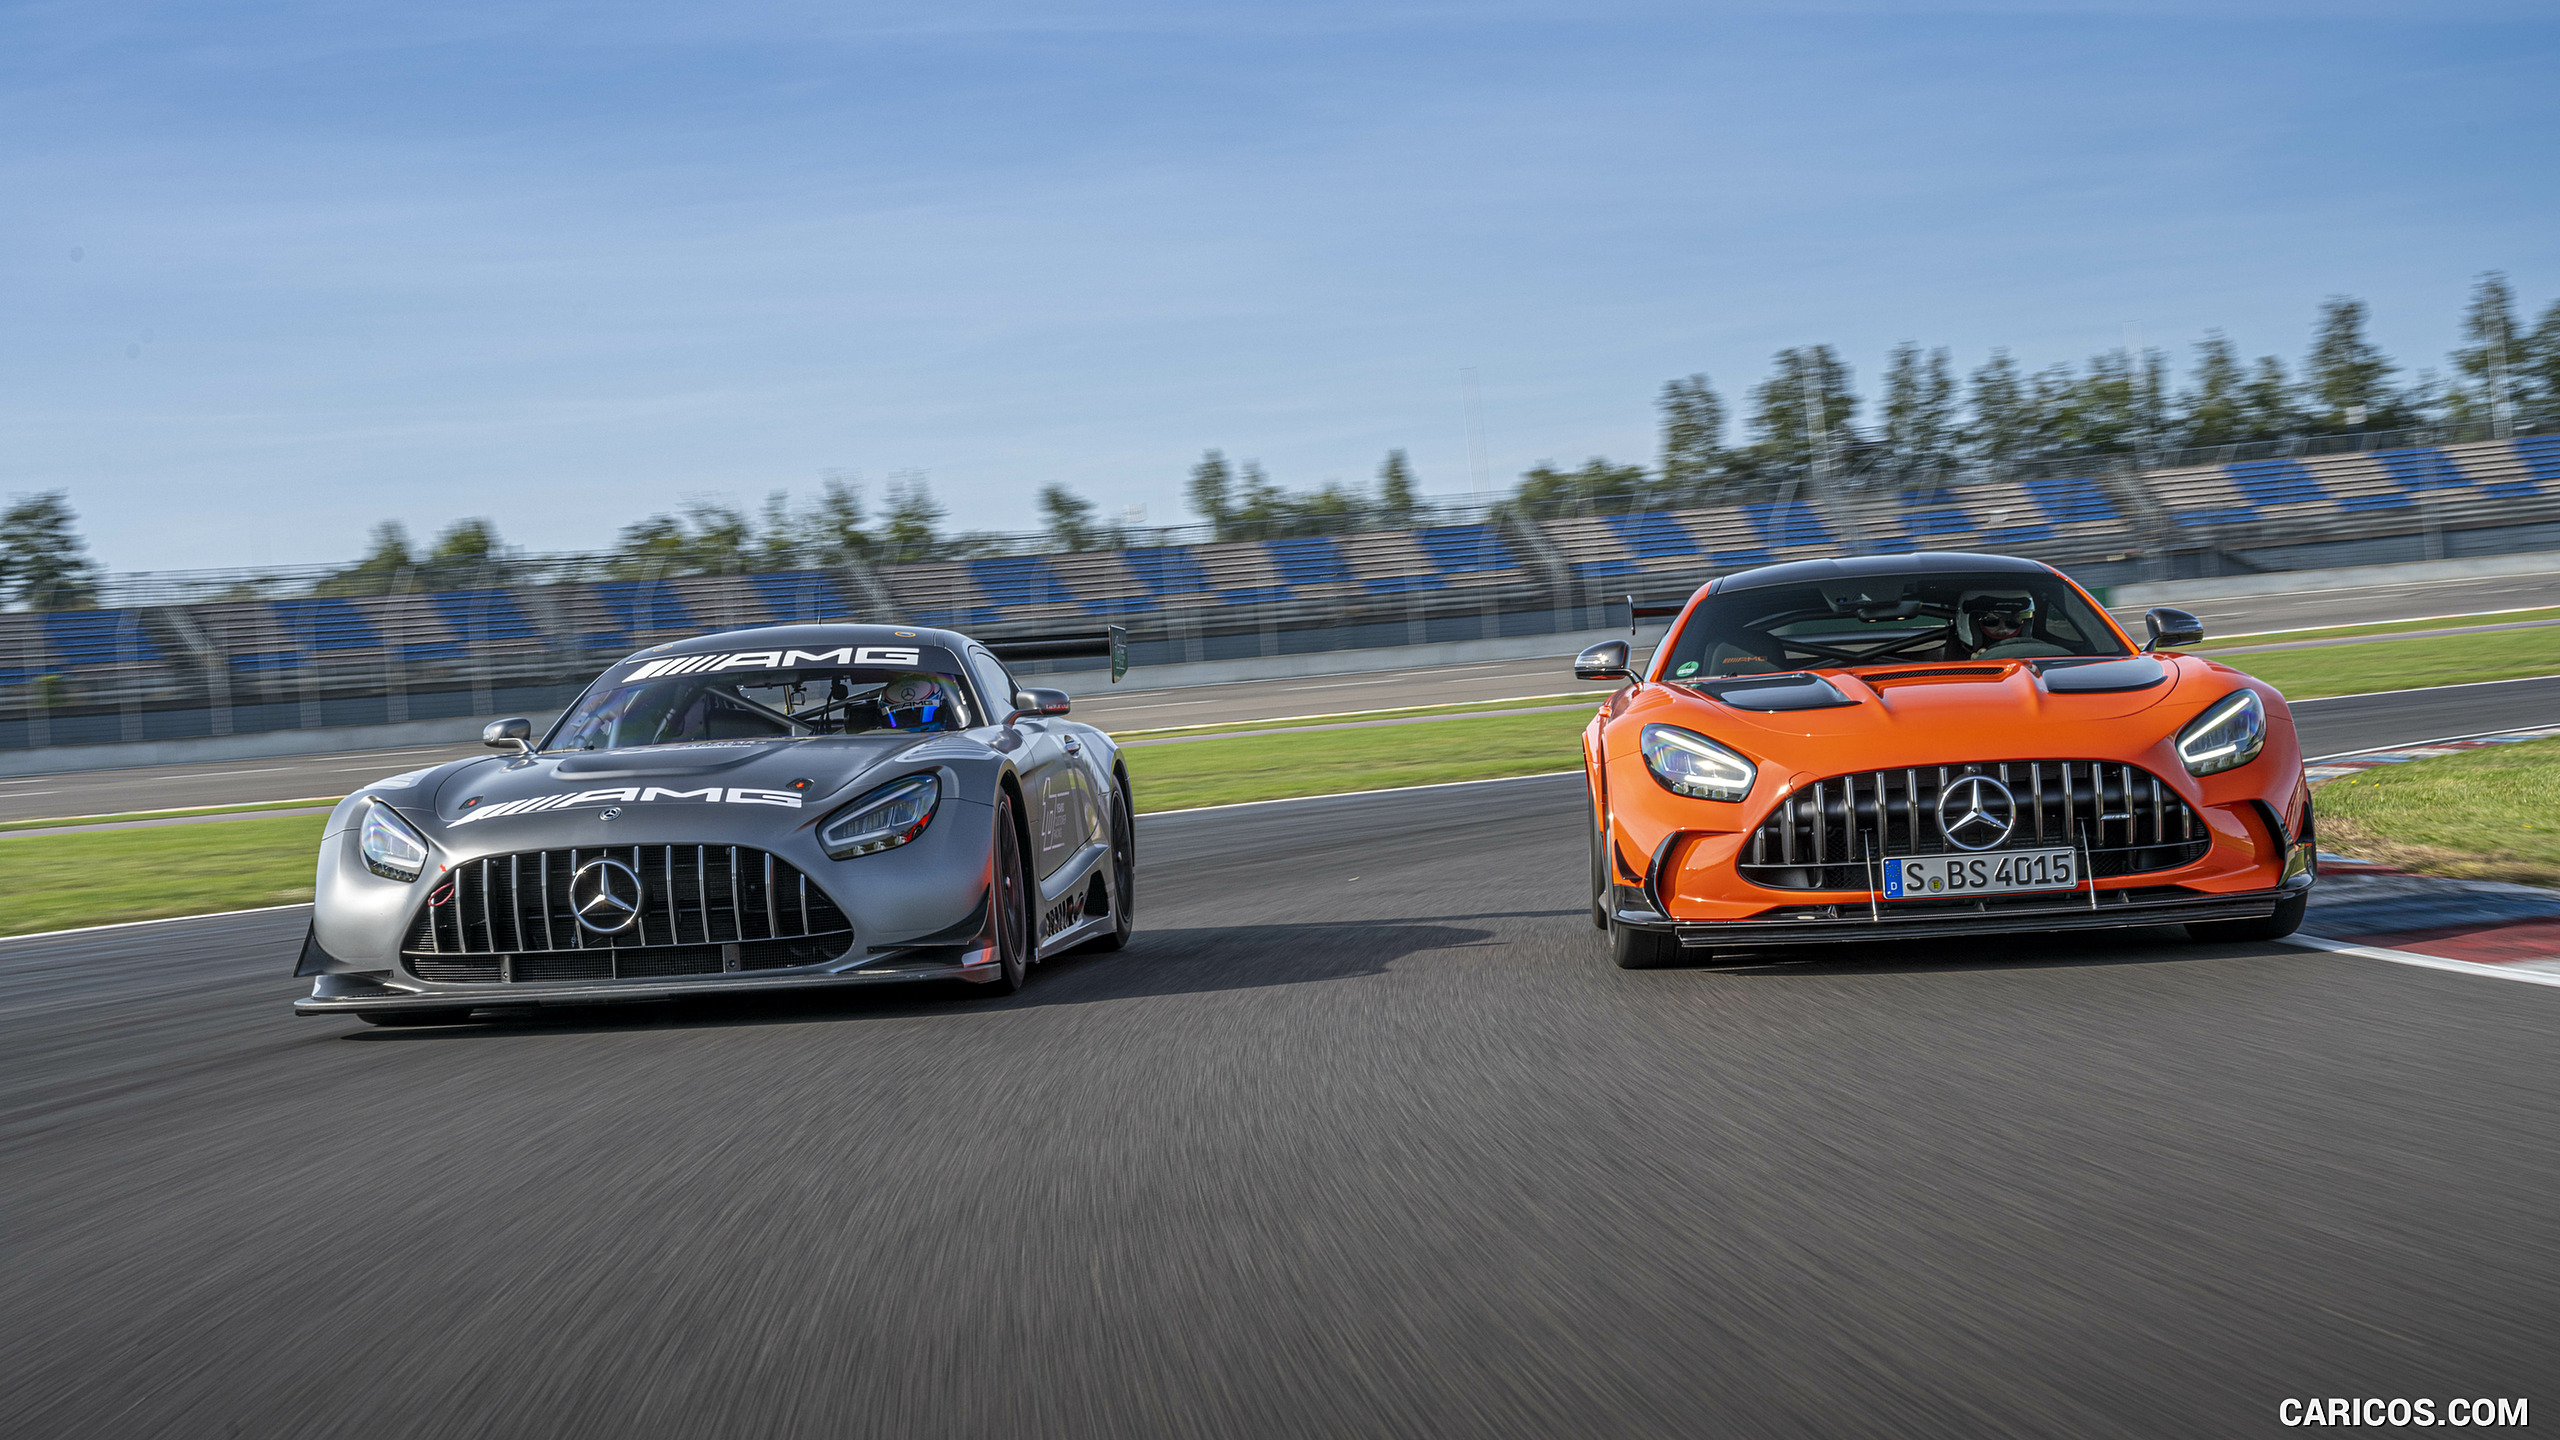 2021 Mercedes-AMG GT Black Series (Color: Magma Beam) and AMG GT3 Racing Car, #139 of 215